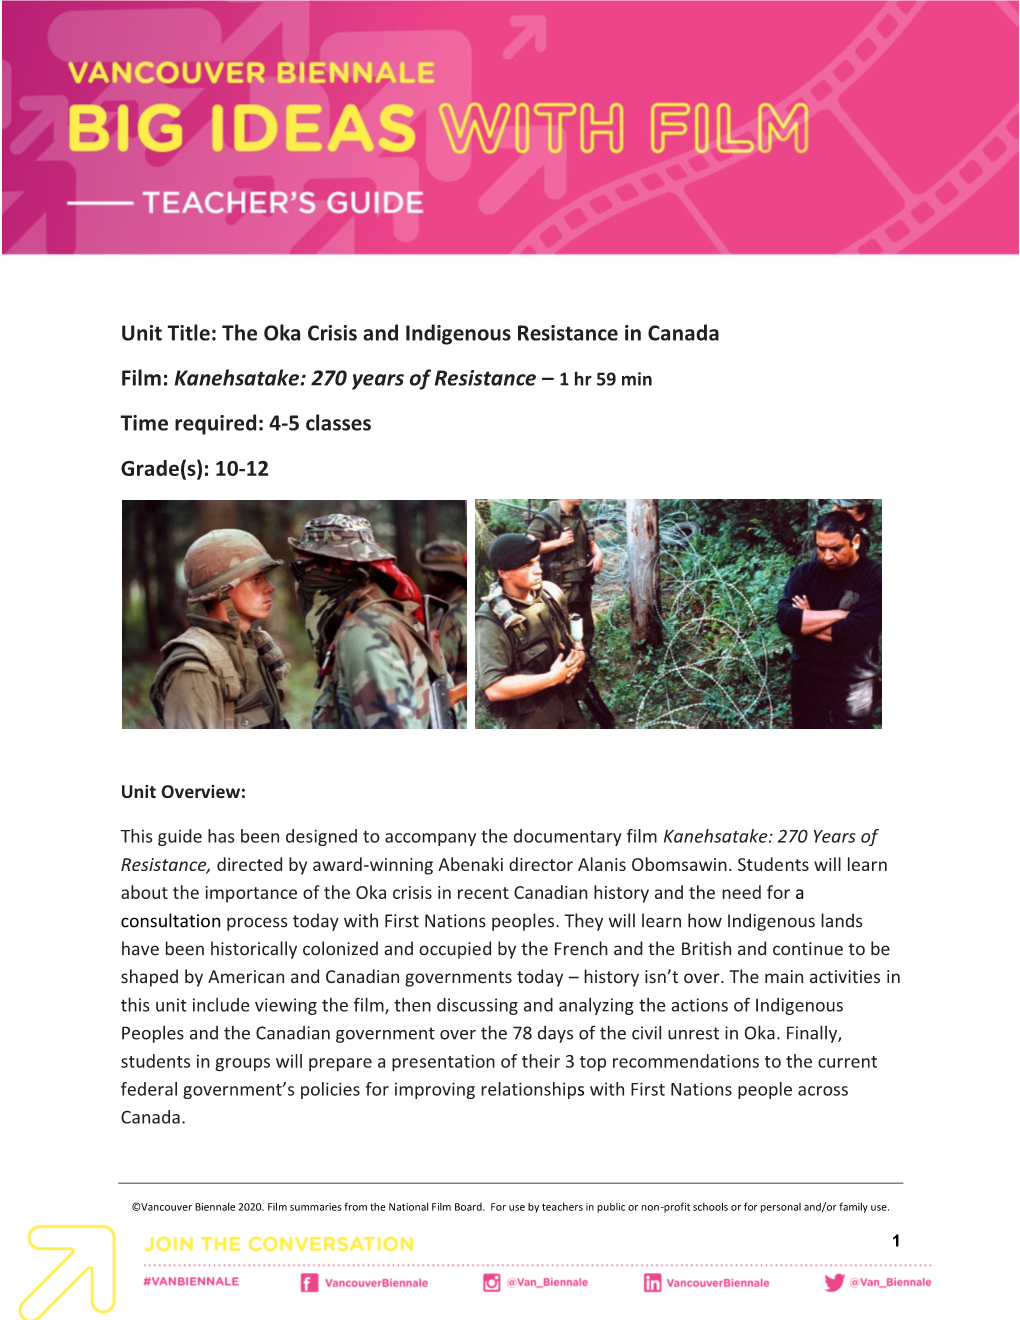 The Oka Crisis and Indigenous Resistance in Canada Film